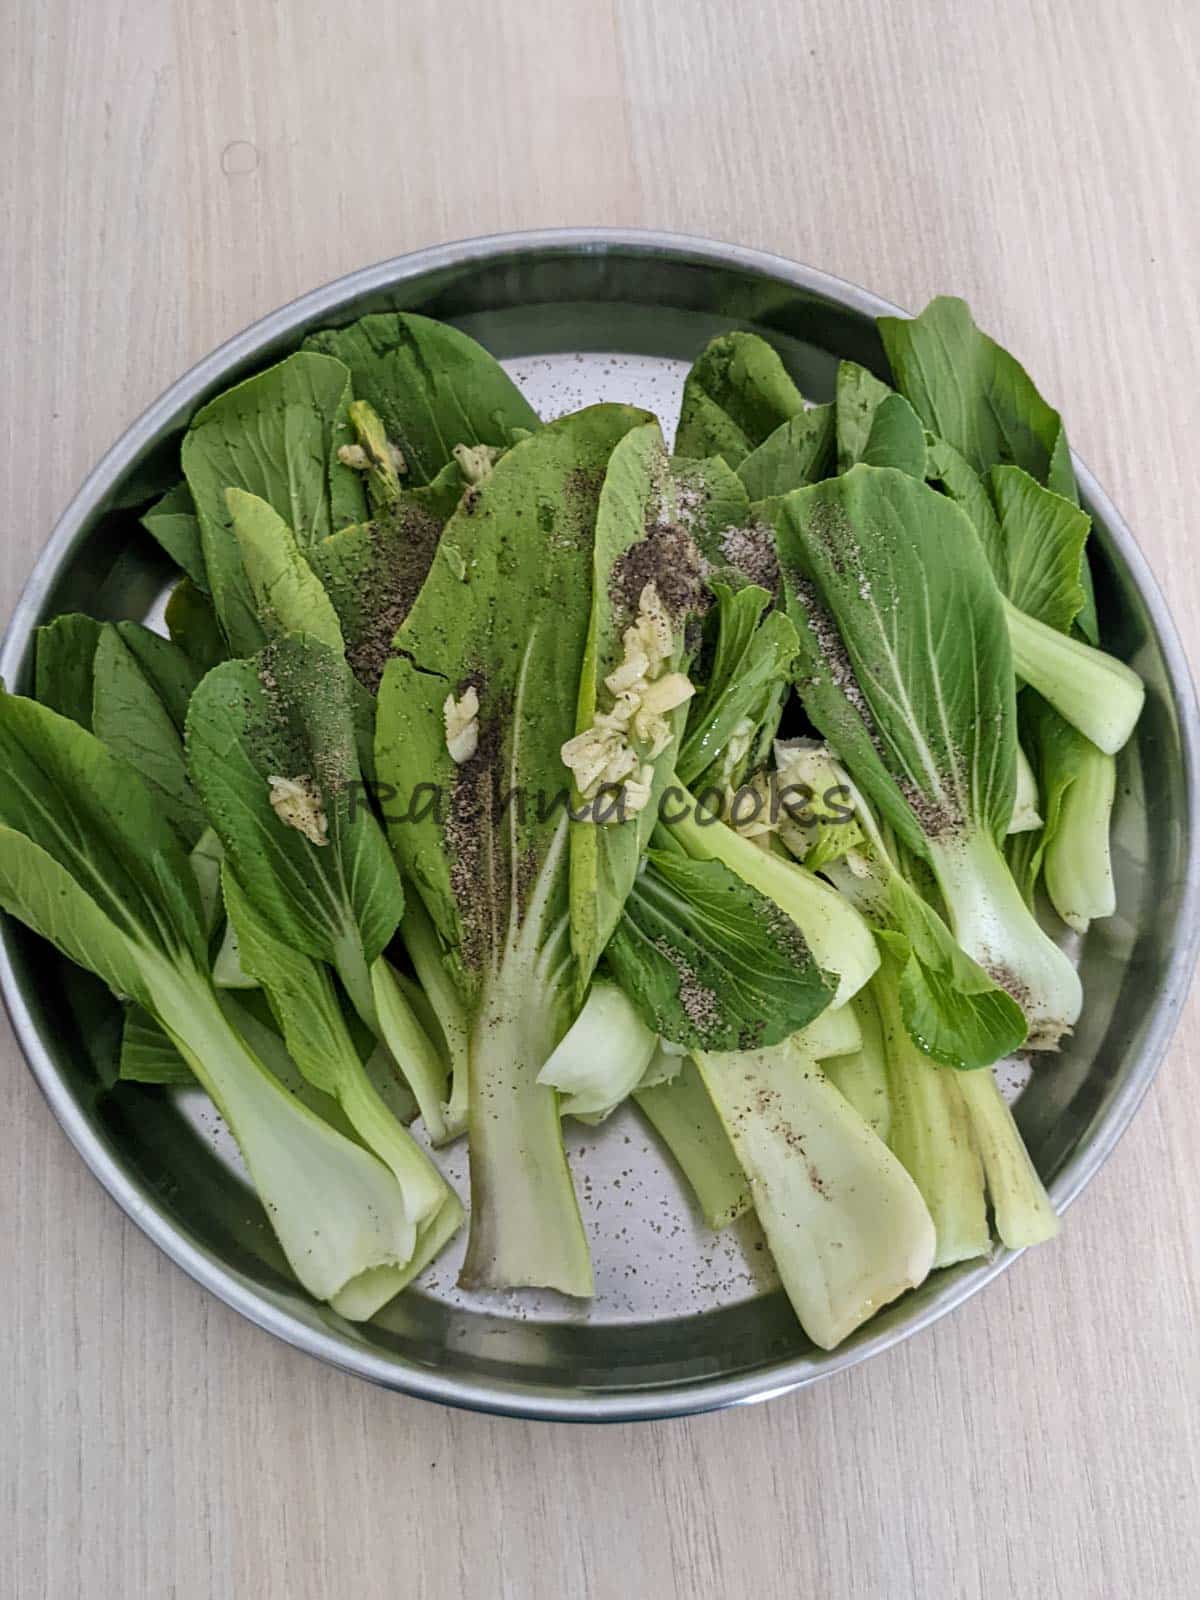 Bok choy tossed with oil and seasonings.